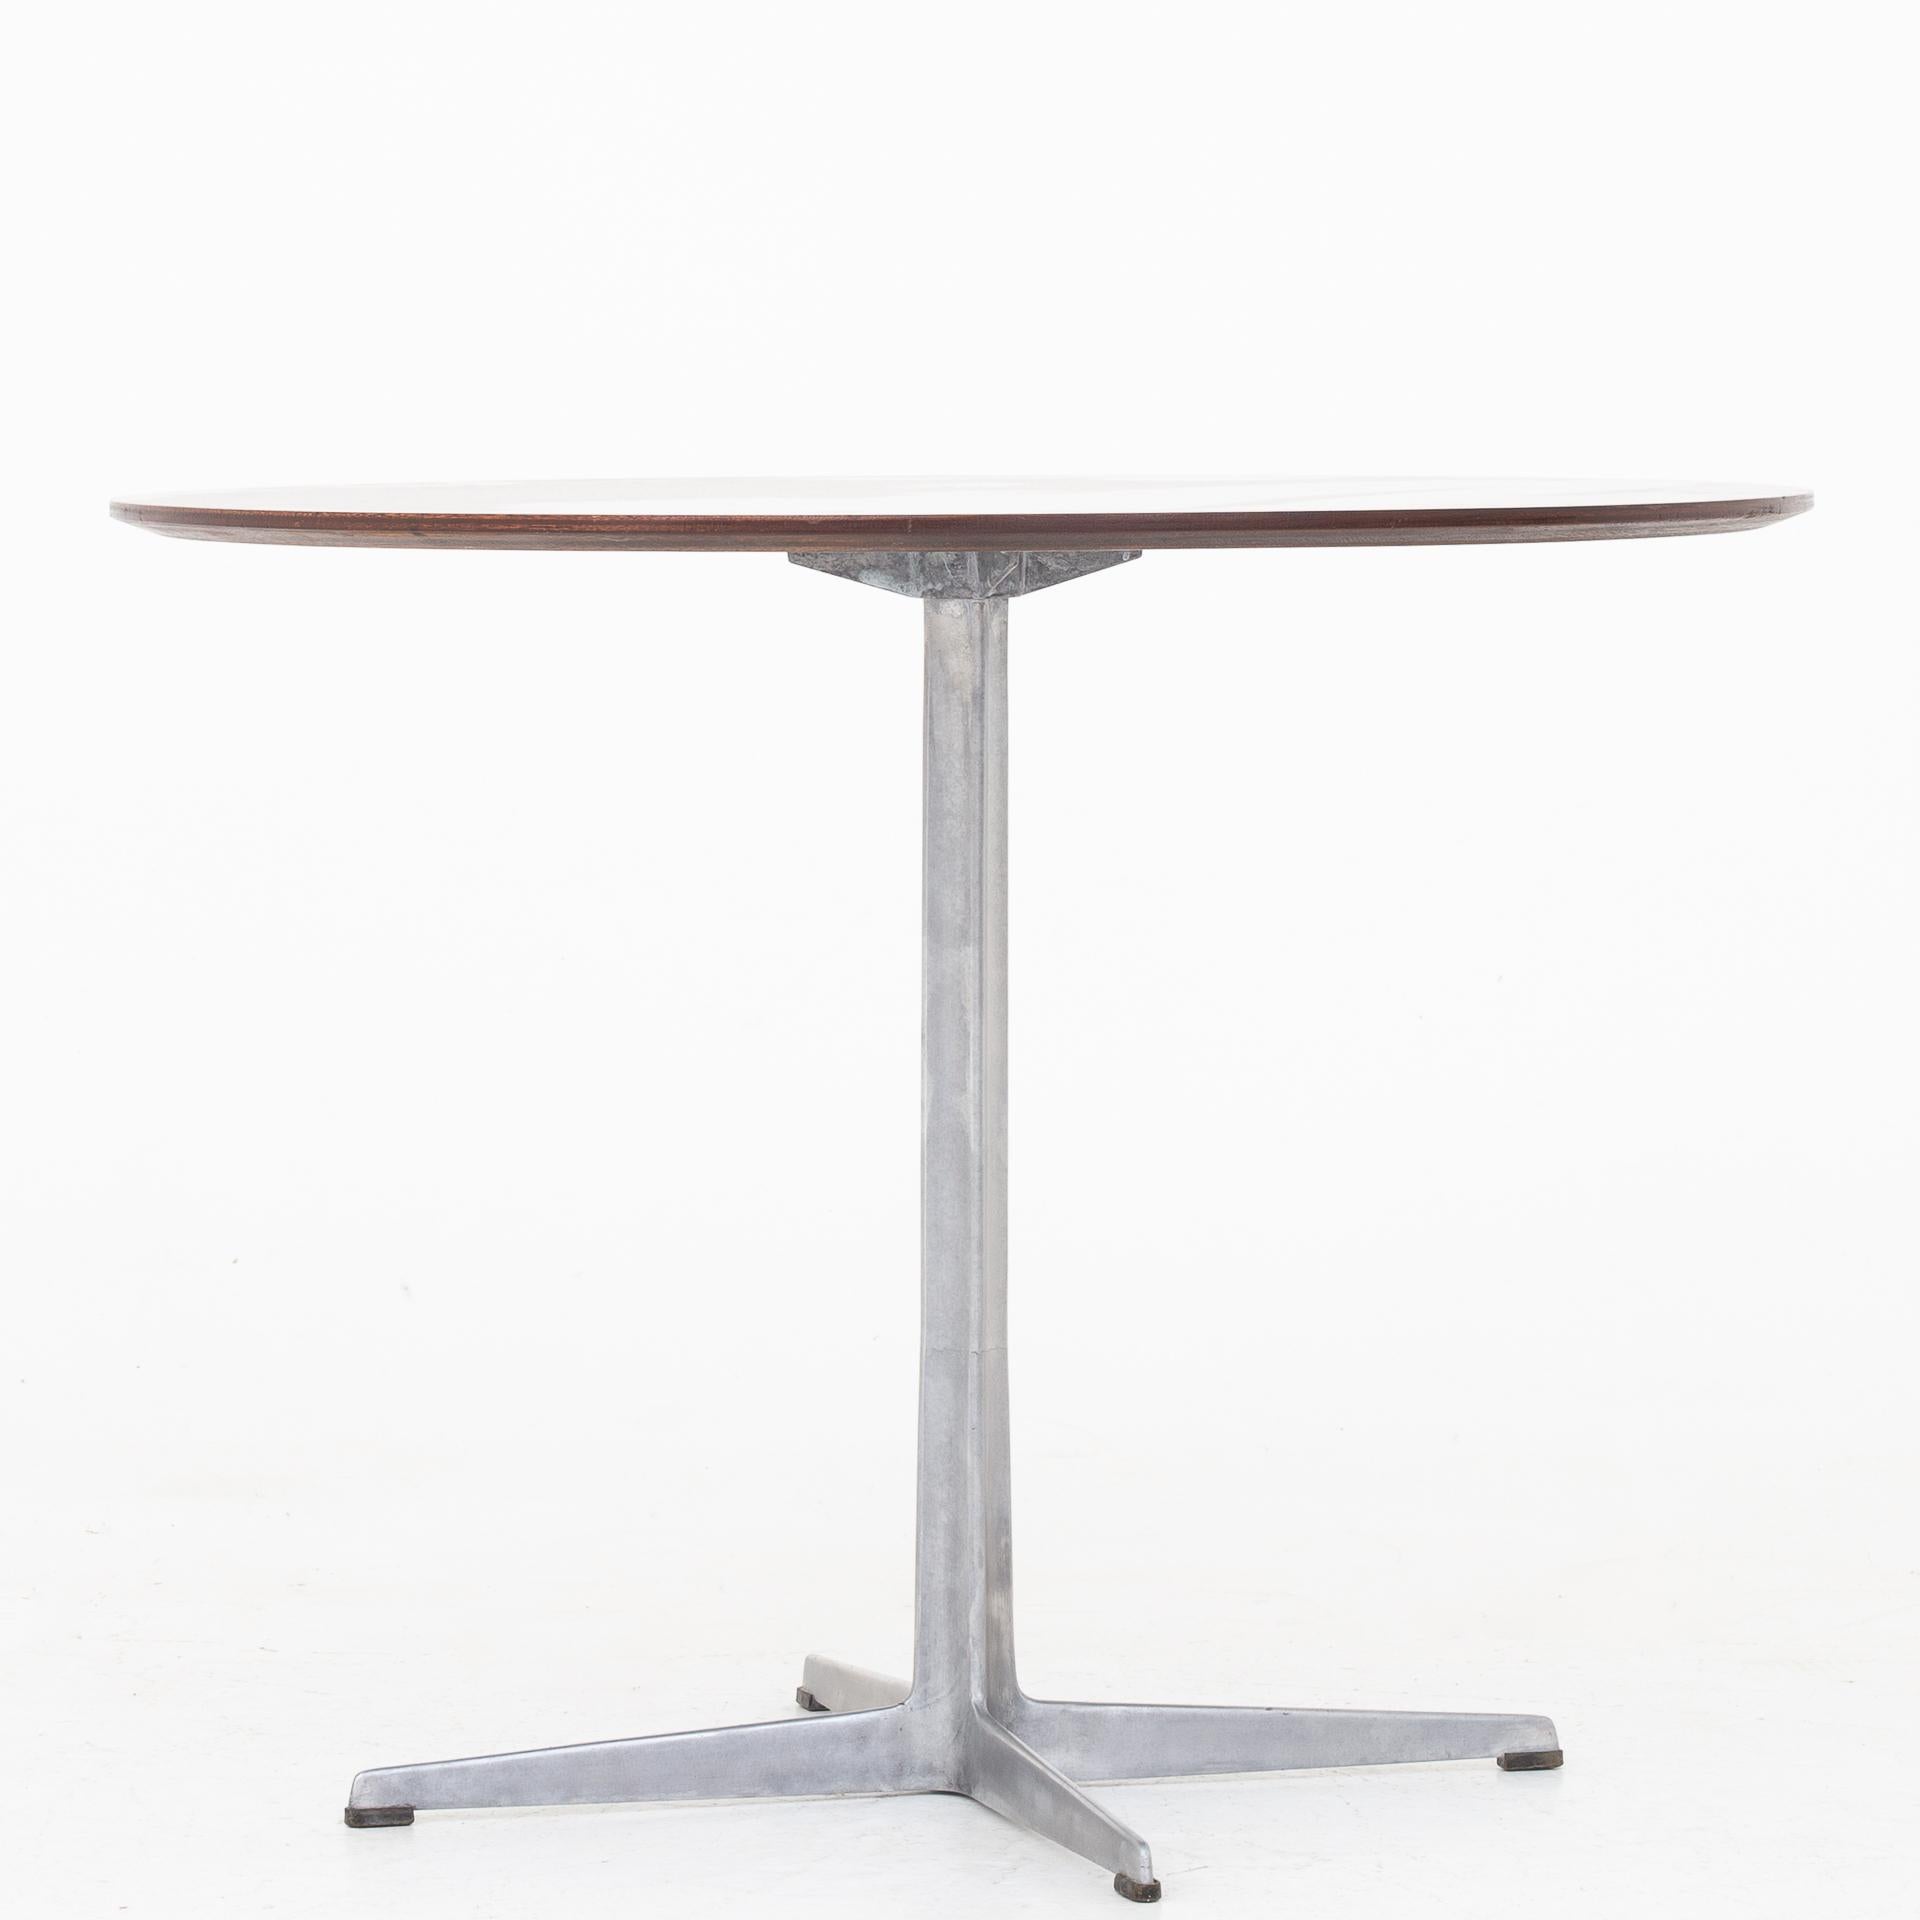 Table with a round top of rosewood with base of aluminum. Maker Fritz Hansen.